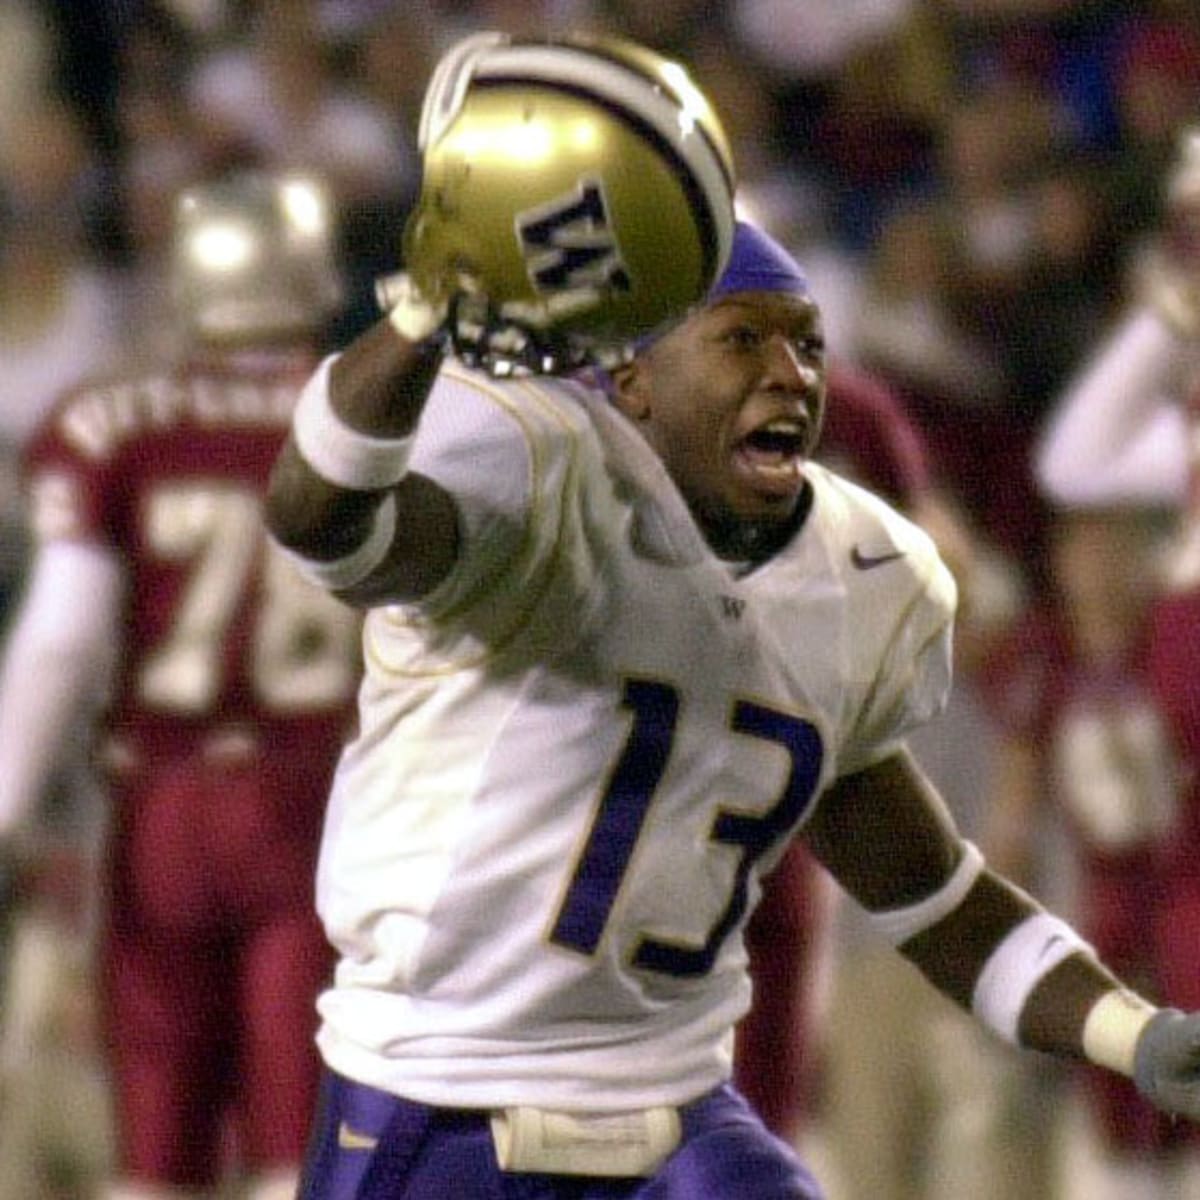 Remembering Nate Robinson's short-lived college football career